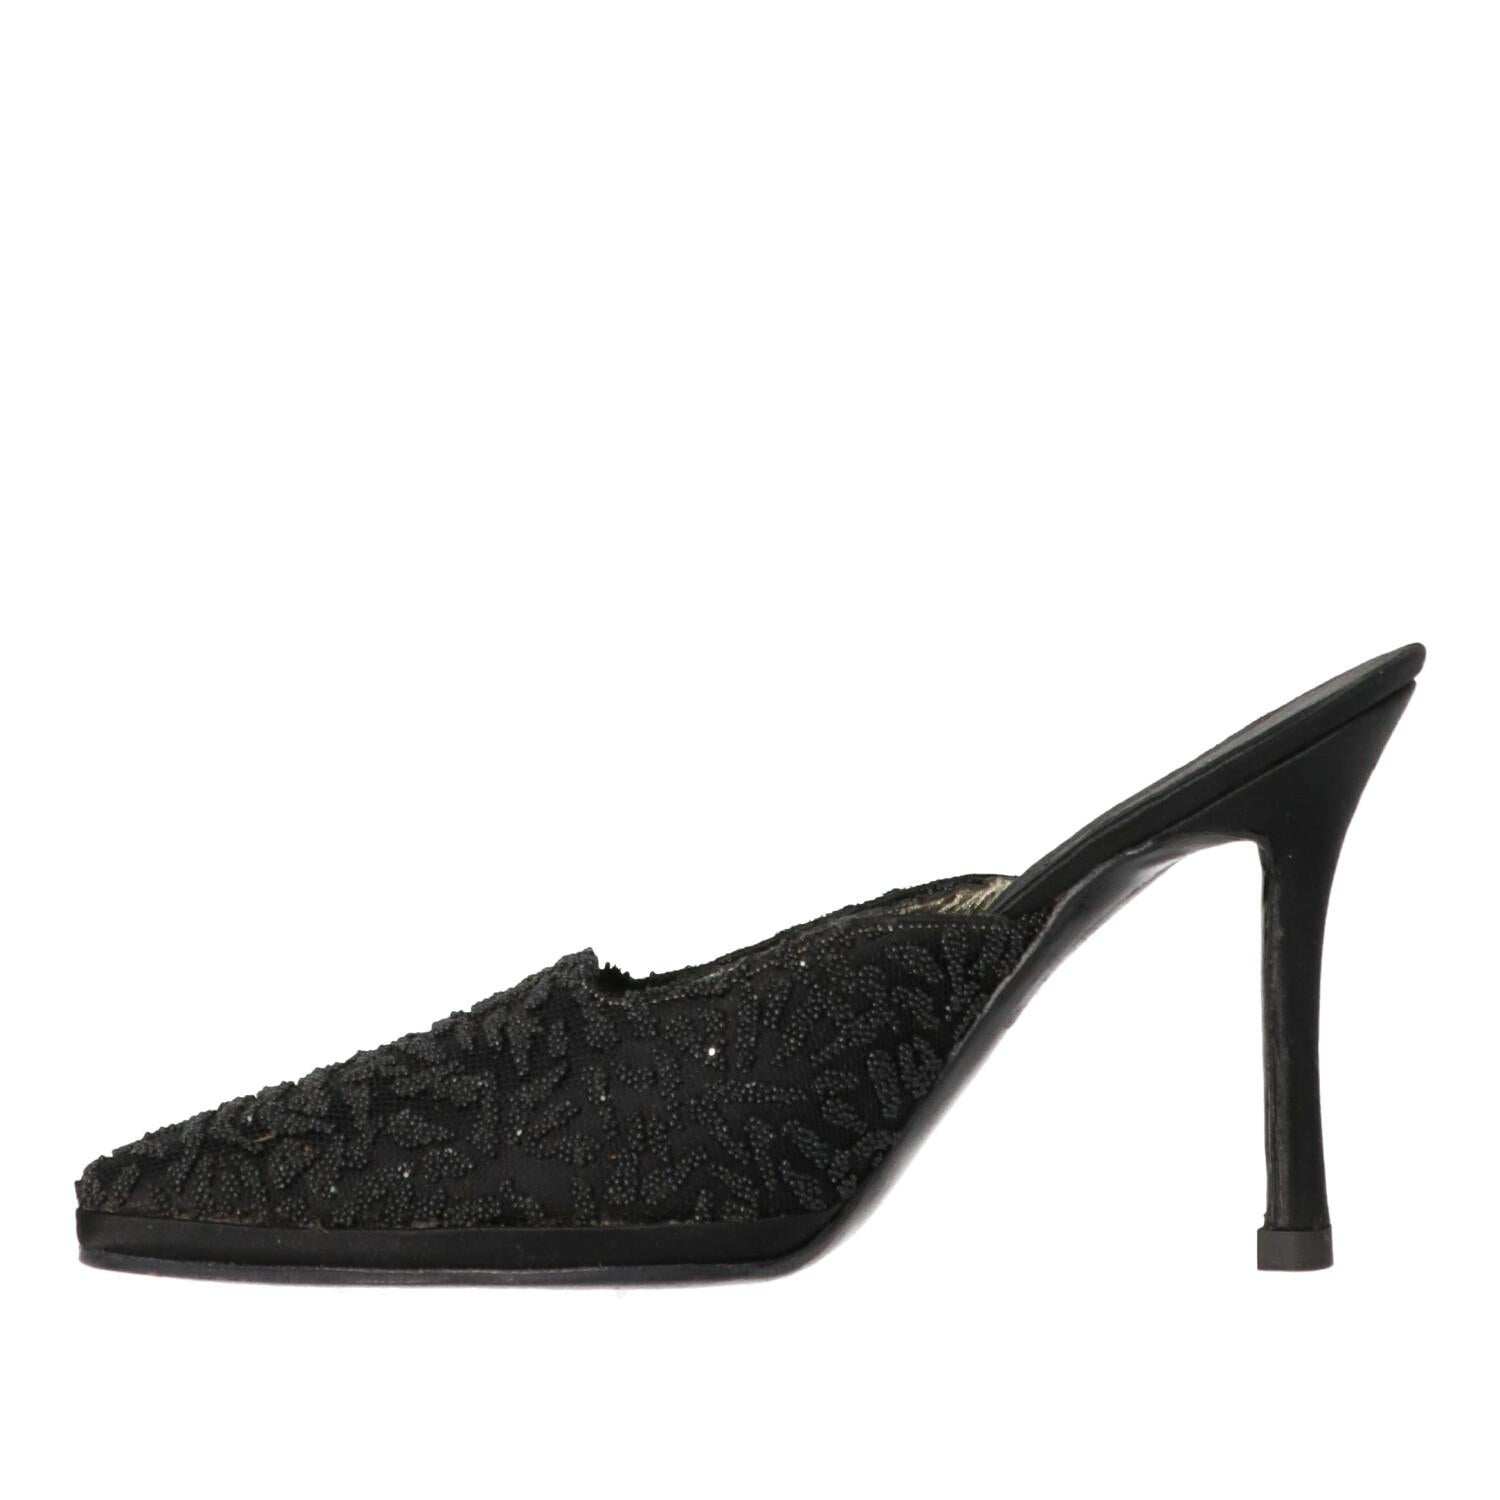 Dal Cò black silk pointed mules with upper applied decorative beads. 11 cm stiletto heels, golden leather lining and black suede insole.

Size: 37 ½ EU

Heel: 11 cm
Length insole: 26 cm

Product code: X0108

Composition: 100% Silk

Made in: